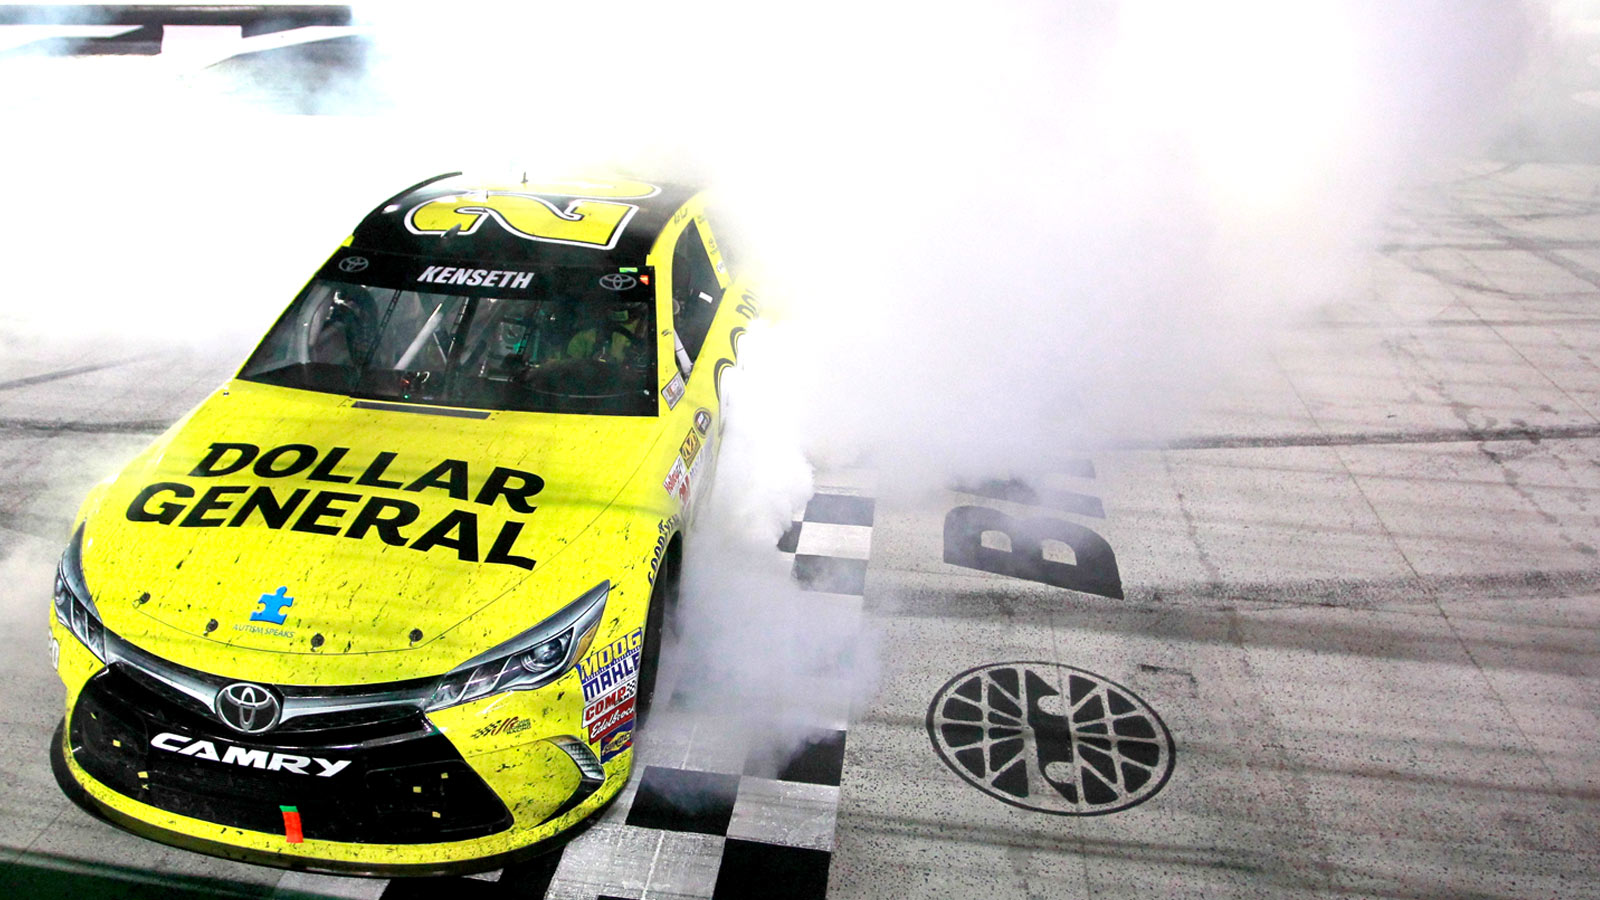 Matt Kenseth jumps up the ranks after Bristol win, but a familiar face is out front